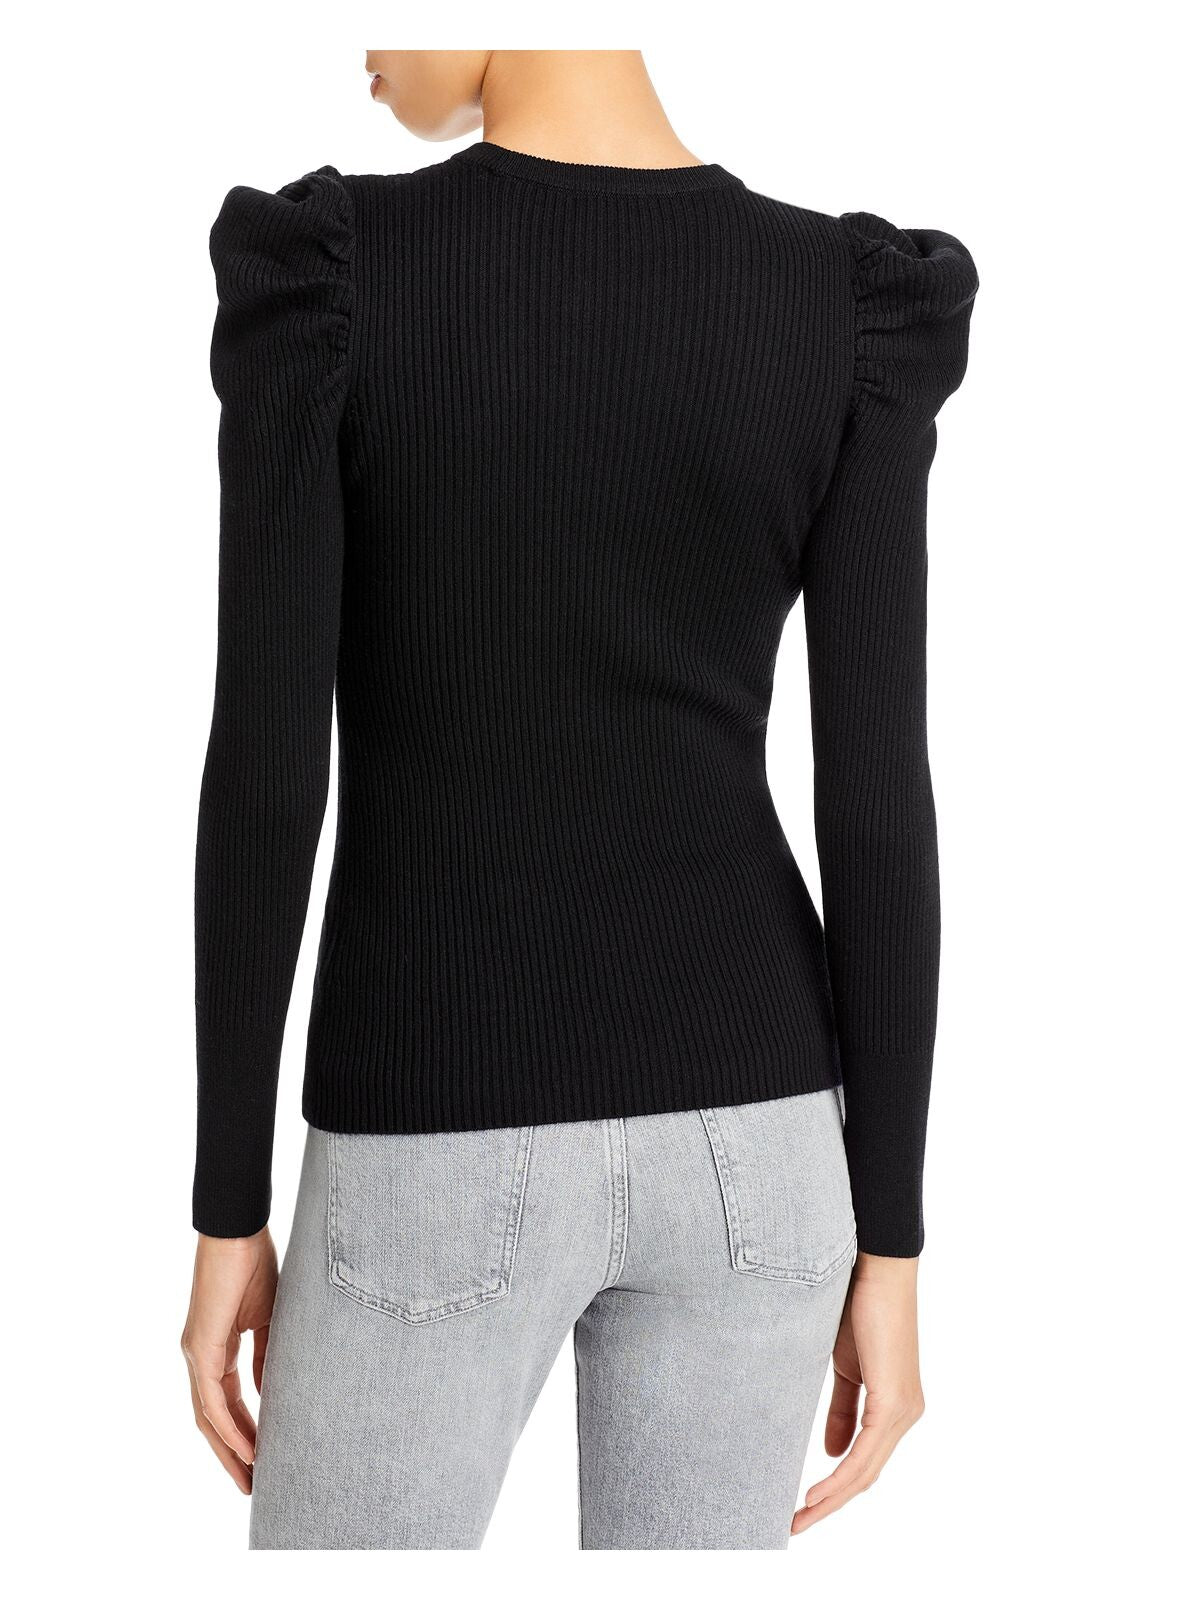 7 FOR ALL MANKIND Womens Ribbed Ruffled Pouf Sleeve Crew Neck Sweater